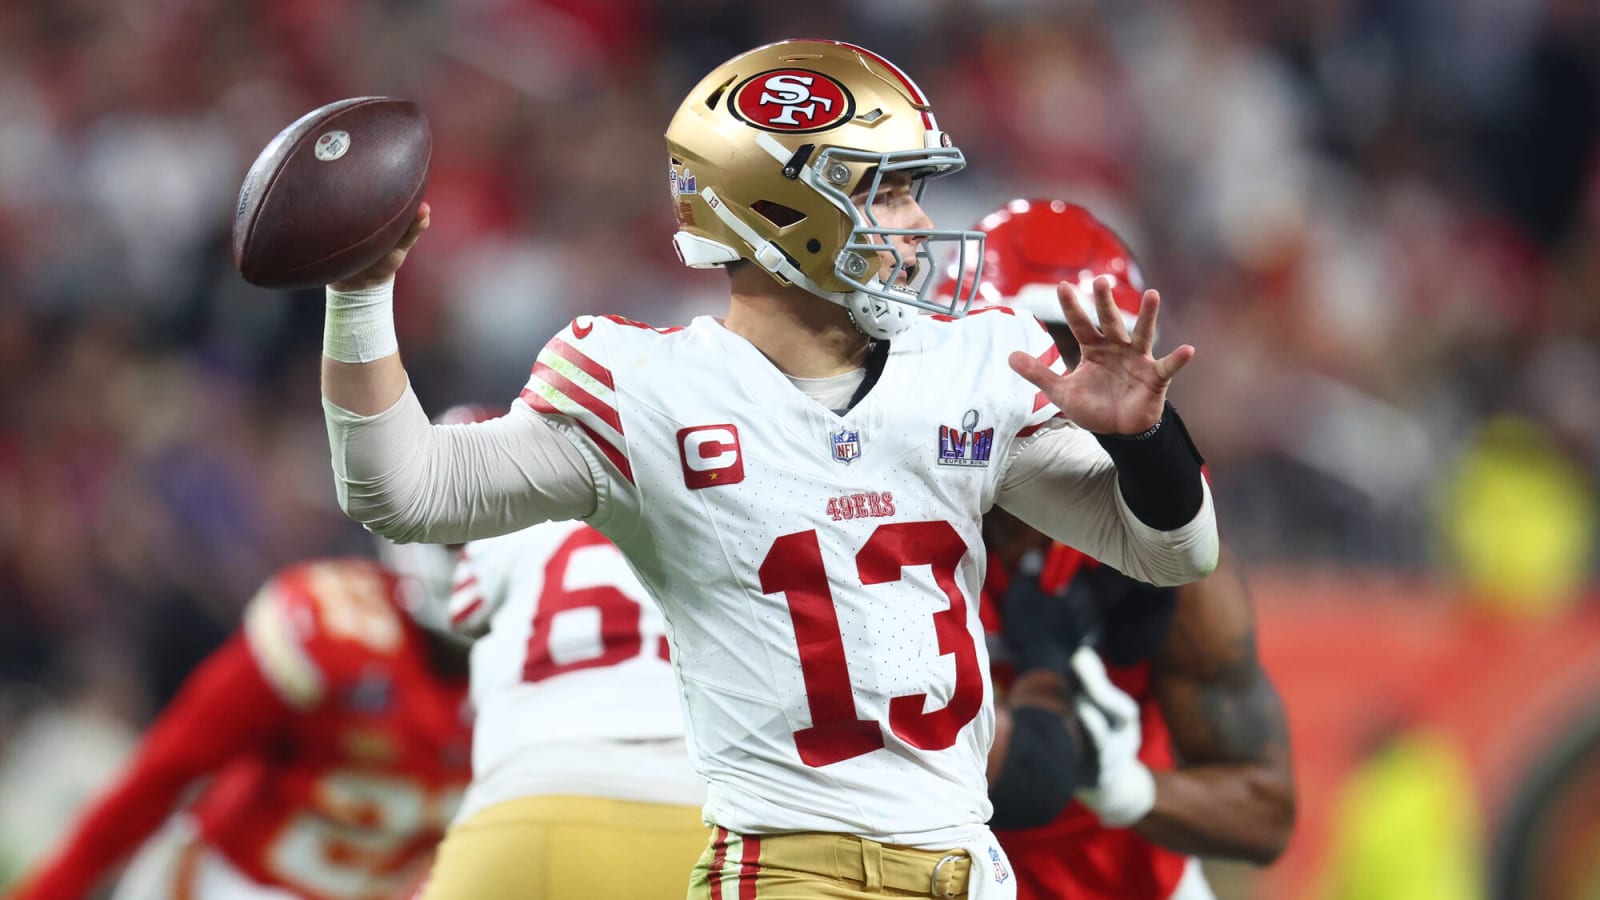 Report: Newly Signed San Francisco 49ers QB Set To Make 2X Brock Purdy’s Base Salary